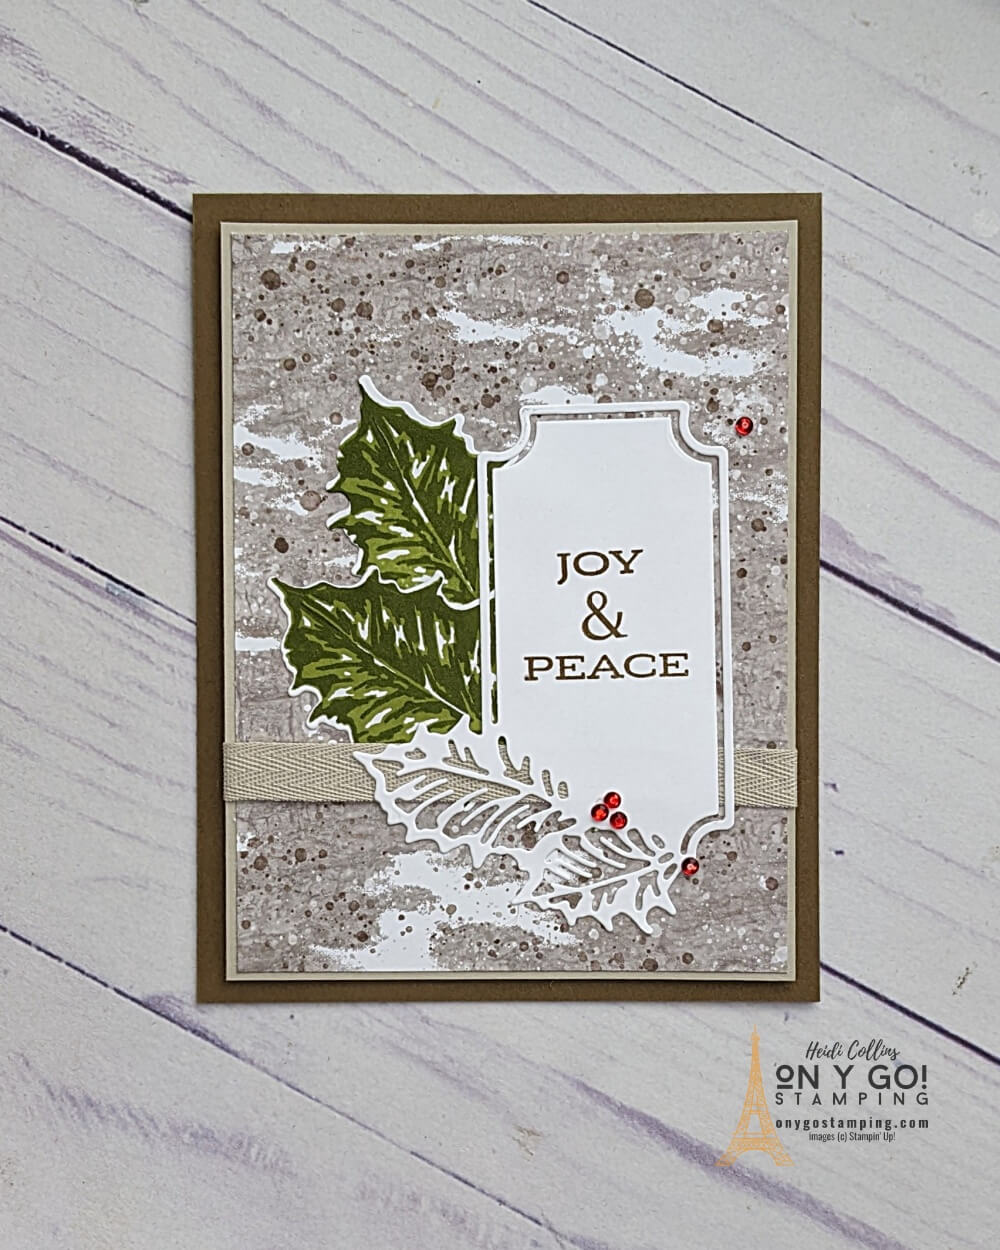 Want to make handmade Christmas cards that are elegant? The Leaves of Holly stamp set, coordinating dies, and Boughs of Holly patterned paper from Stampin' Up!® makes it easy.